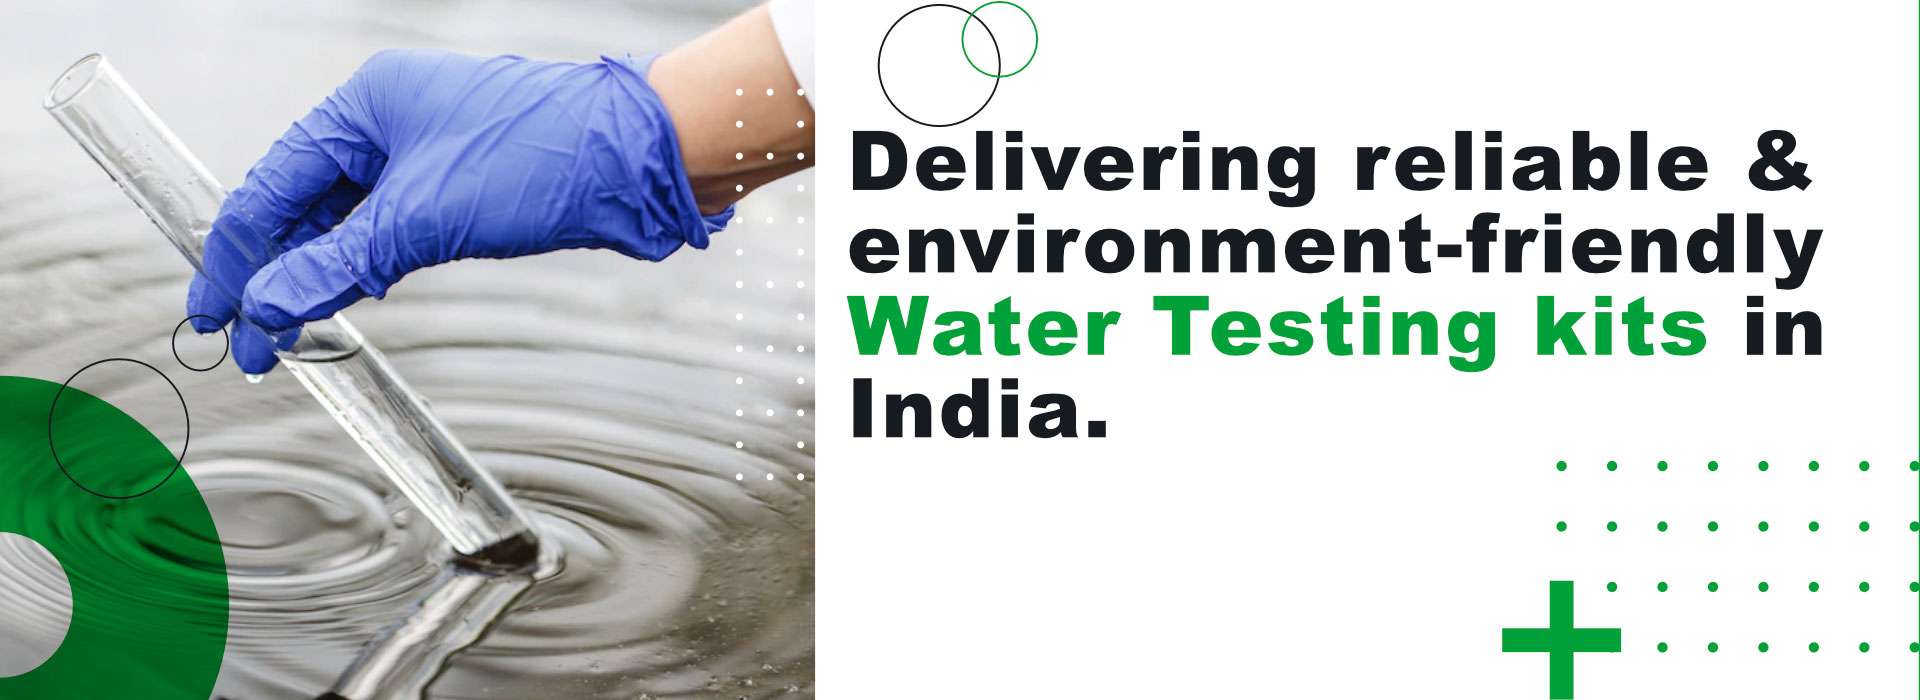  Delivering reliable & environment-friendly water Testing kits in India Manufacturers in Imphal